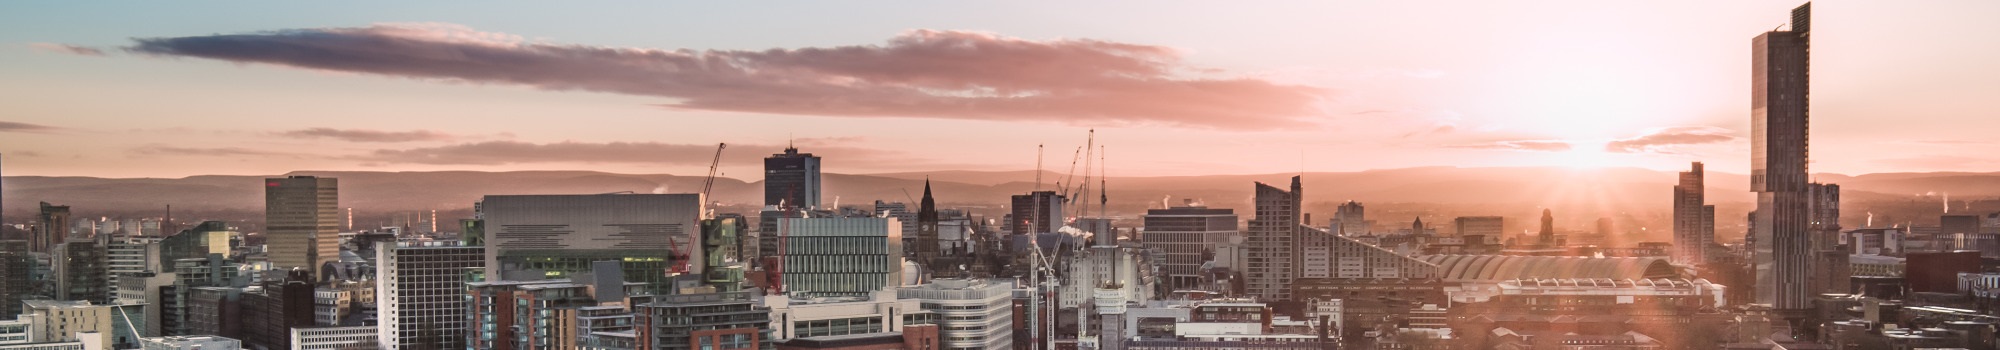 manchester-skyline-picture-id1067367850637437290119123547